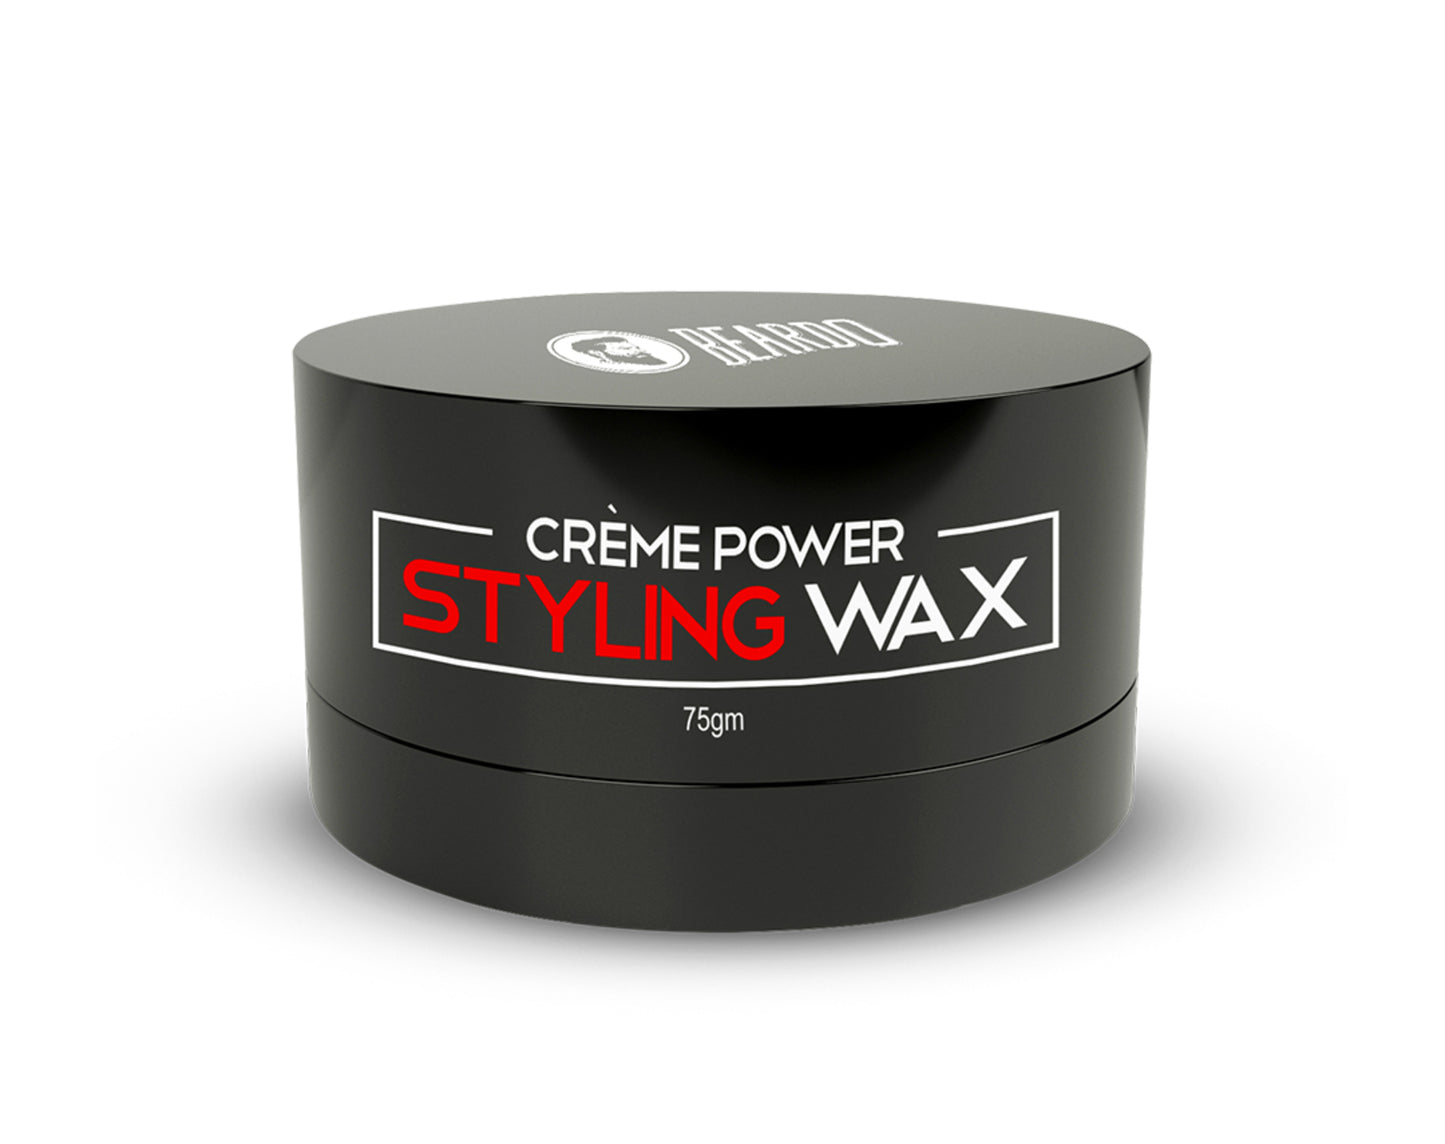 best hair wax, men's hair wax, Men's hair wax, beardo wax, Is Beardo wax good for hair?, Is styling wax good for hair?, What is the difference between hair styling cream and hair wax?, Which wax is good for hair style, Can we use hair wax daily?, Is there any side effects of hair wax?, Is hair wax better than hair gel, Can I use beard wax everyday, Is Beardo wax natural, Is wax better than gel, Is it good to use beard wax